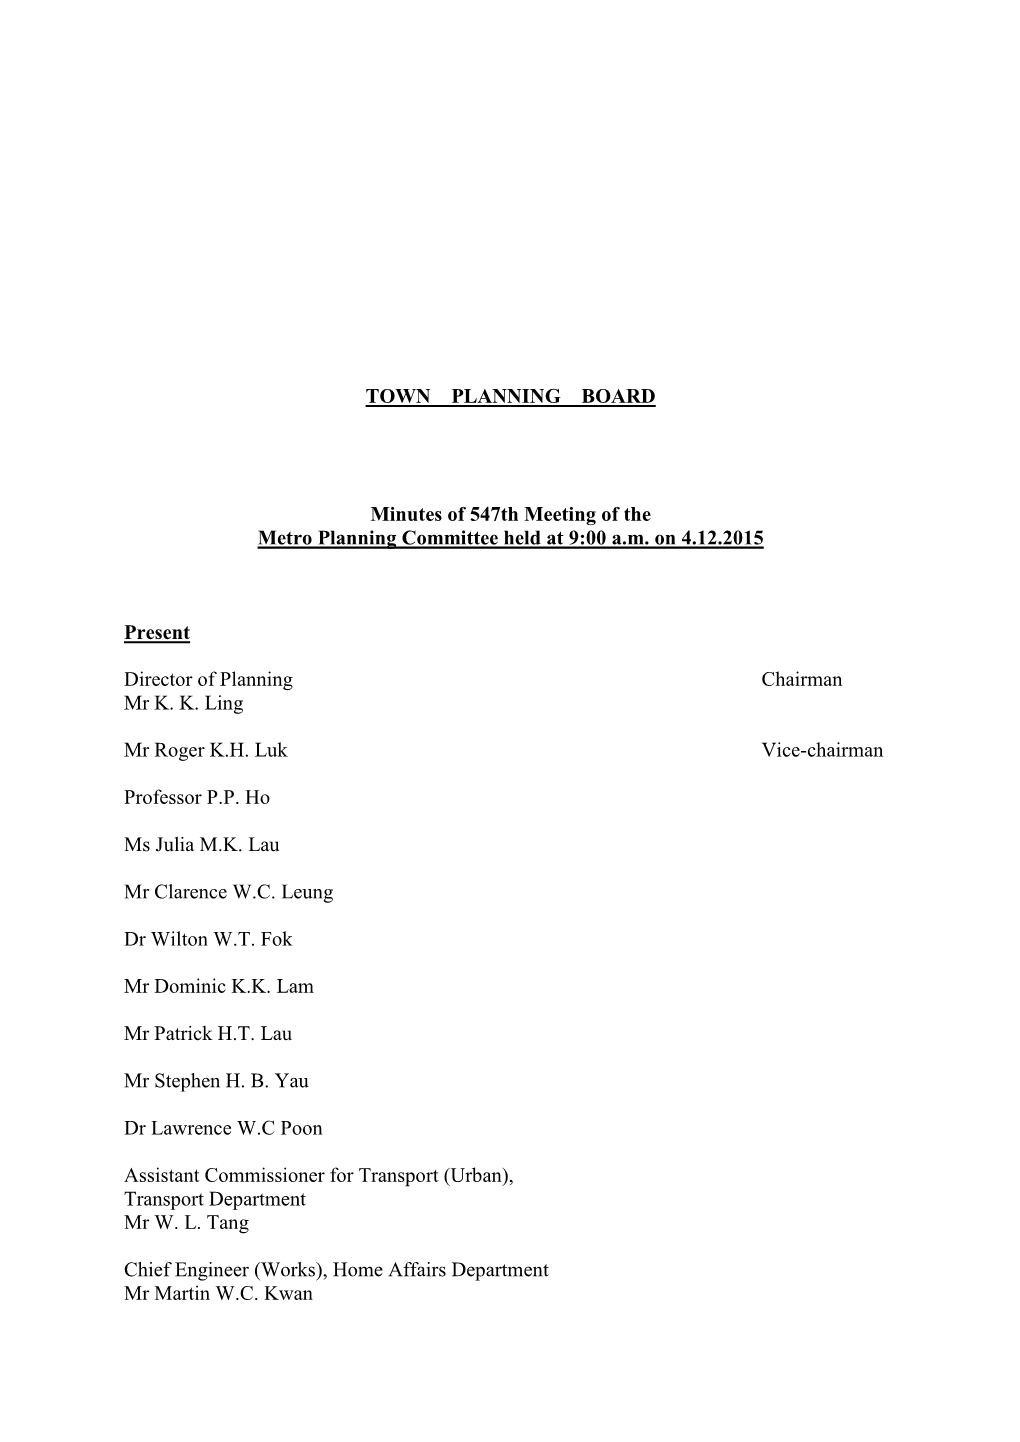 TOWN PLANNING BOARD Minutes of 547Th Meeting of the Metro